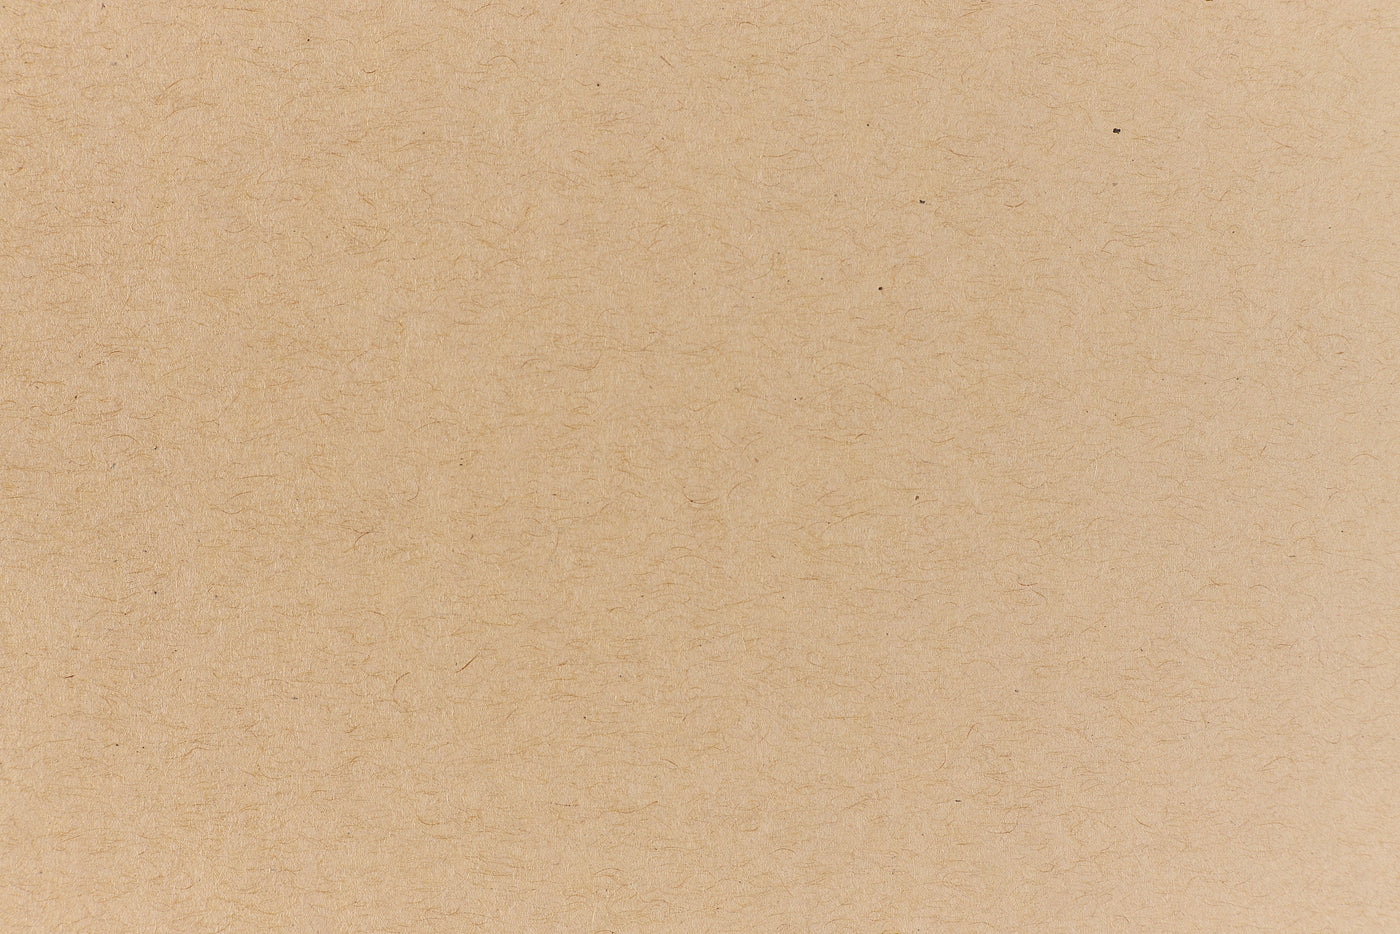 Brown cardstock paper made by French Paper.